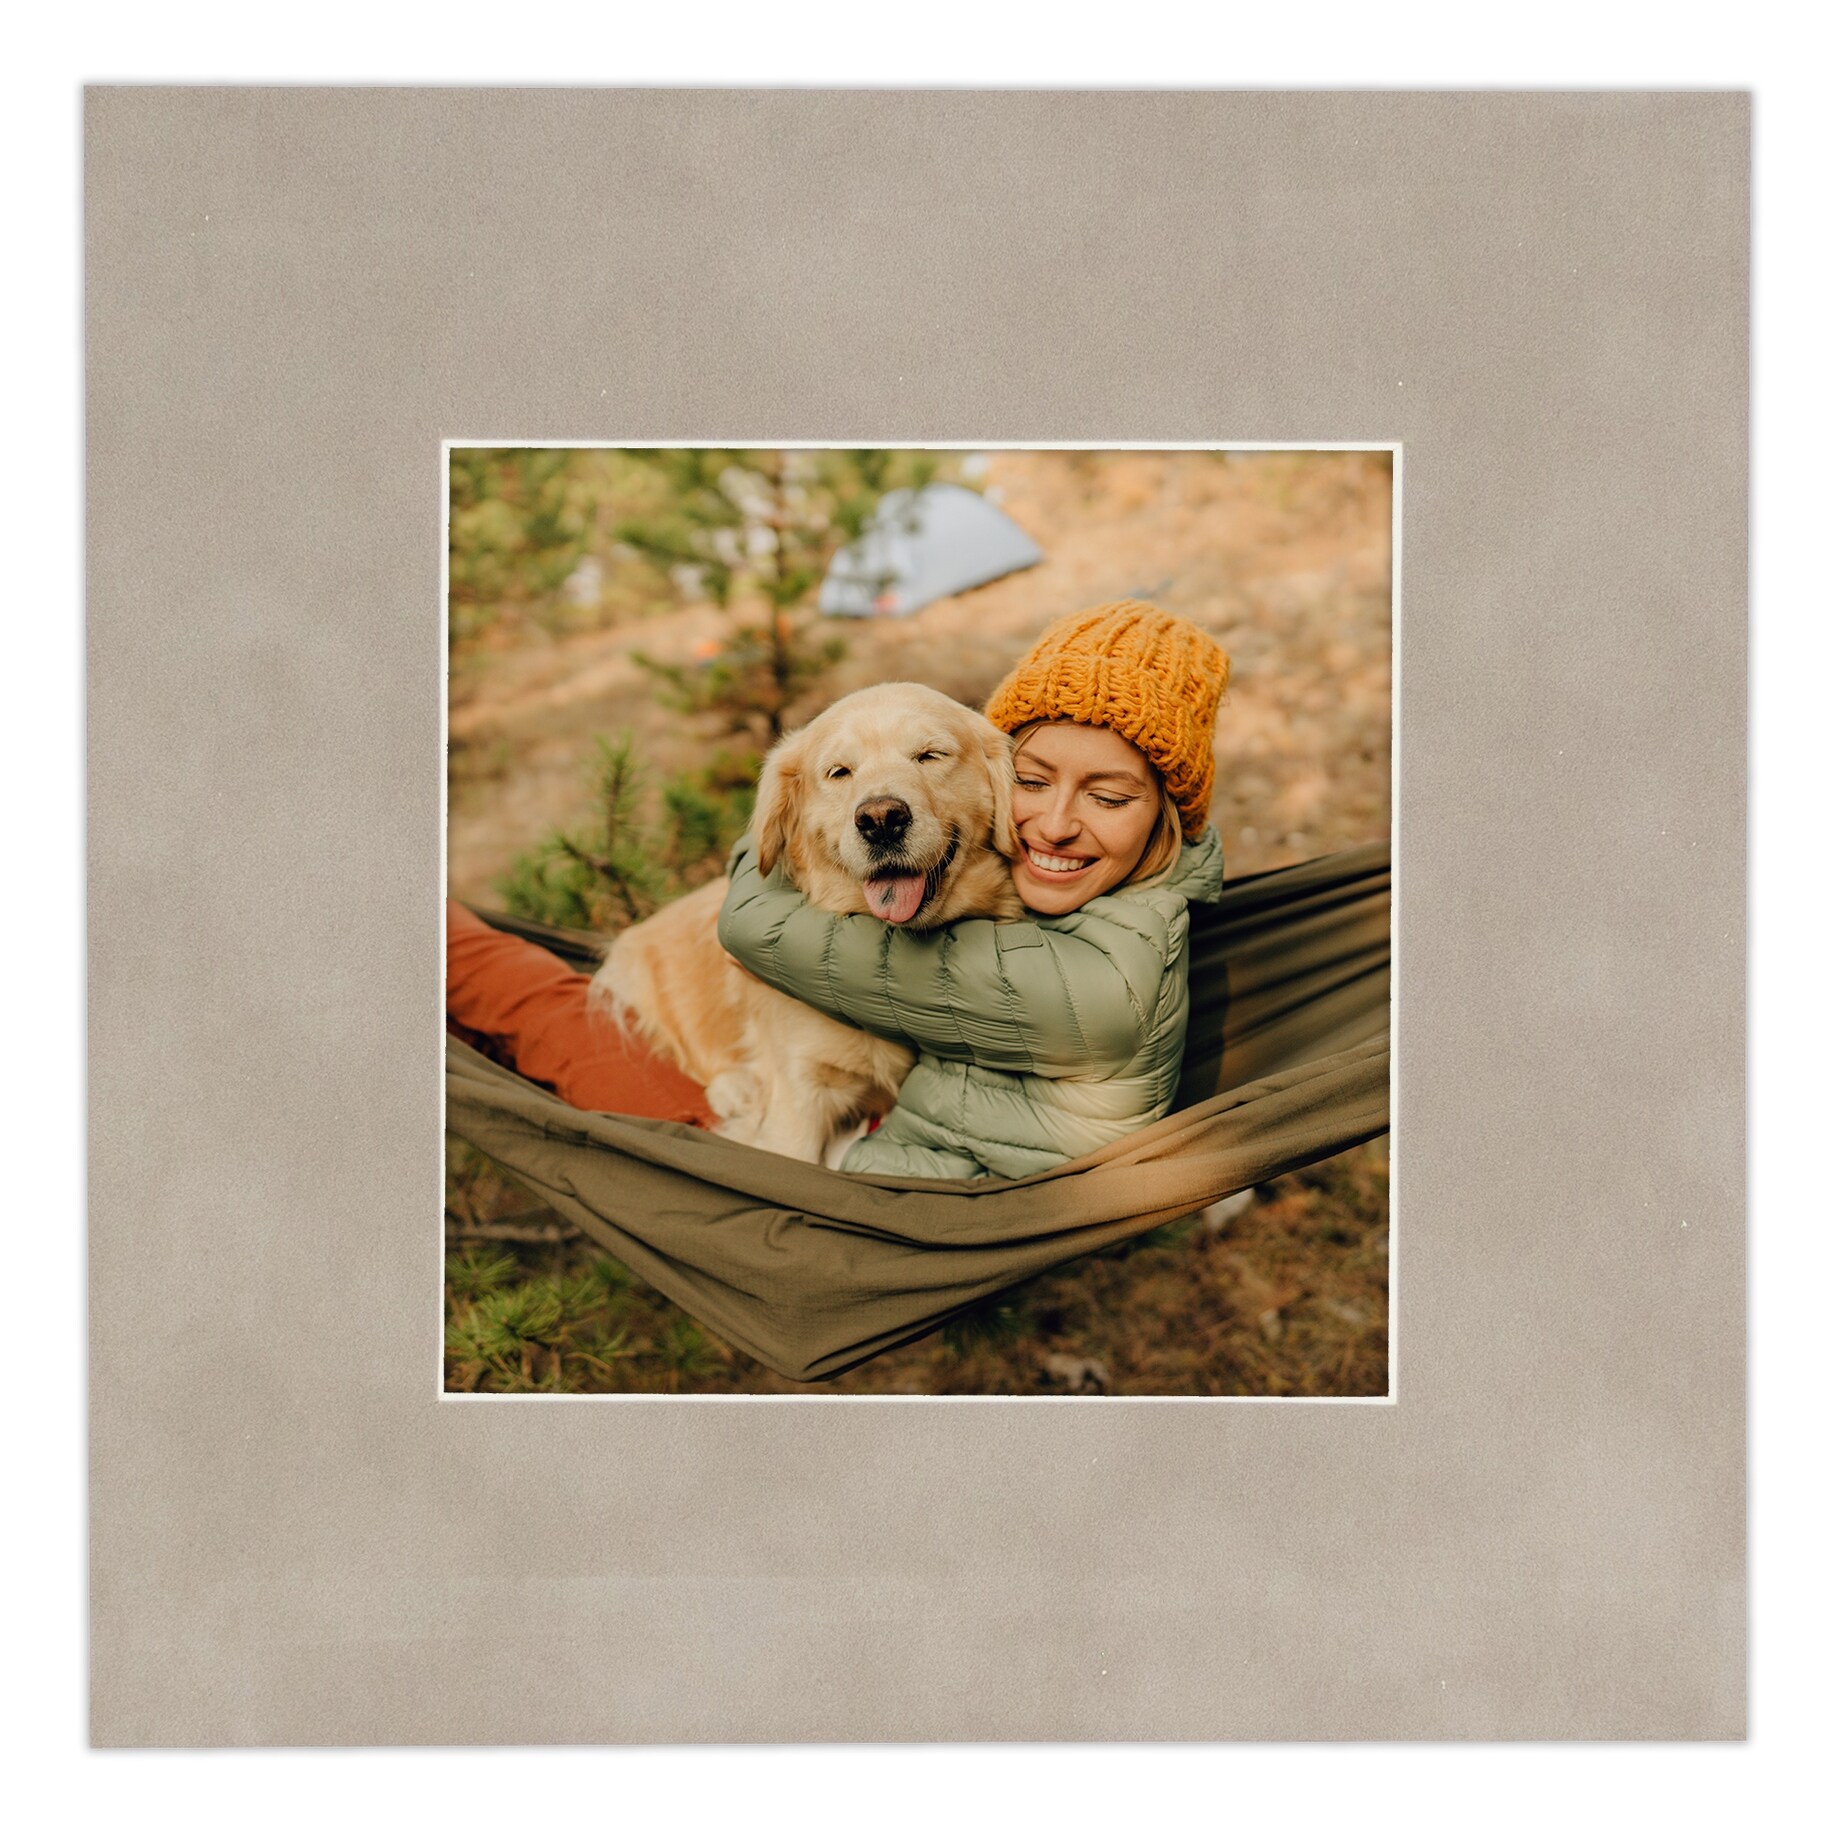 8x10 Mat Bevel Cut for 5x6 Photos - Acid Free Chocolate Brown Precut  Matboard - For Pictures, Photos, Framing - 4-ply Thickness